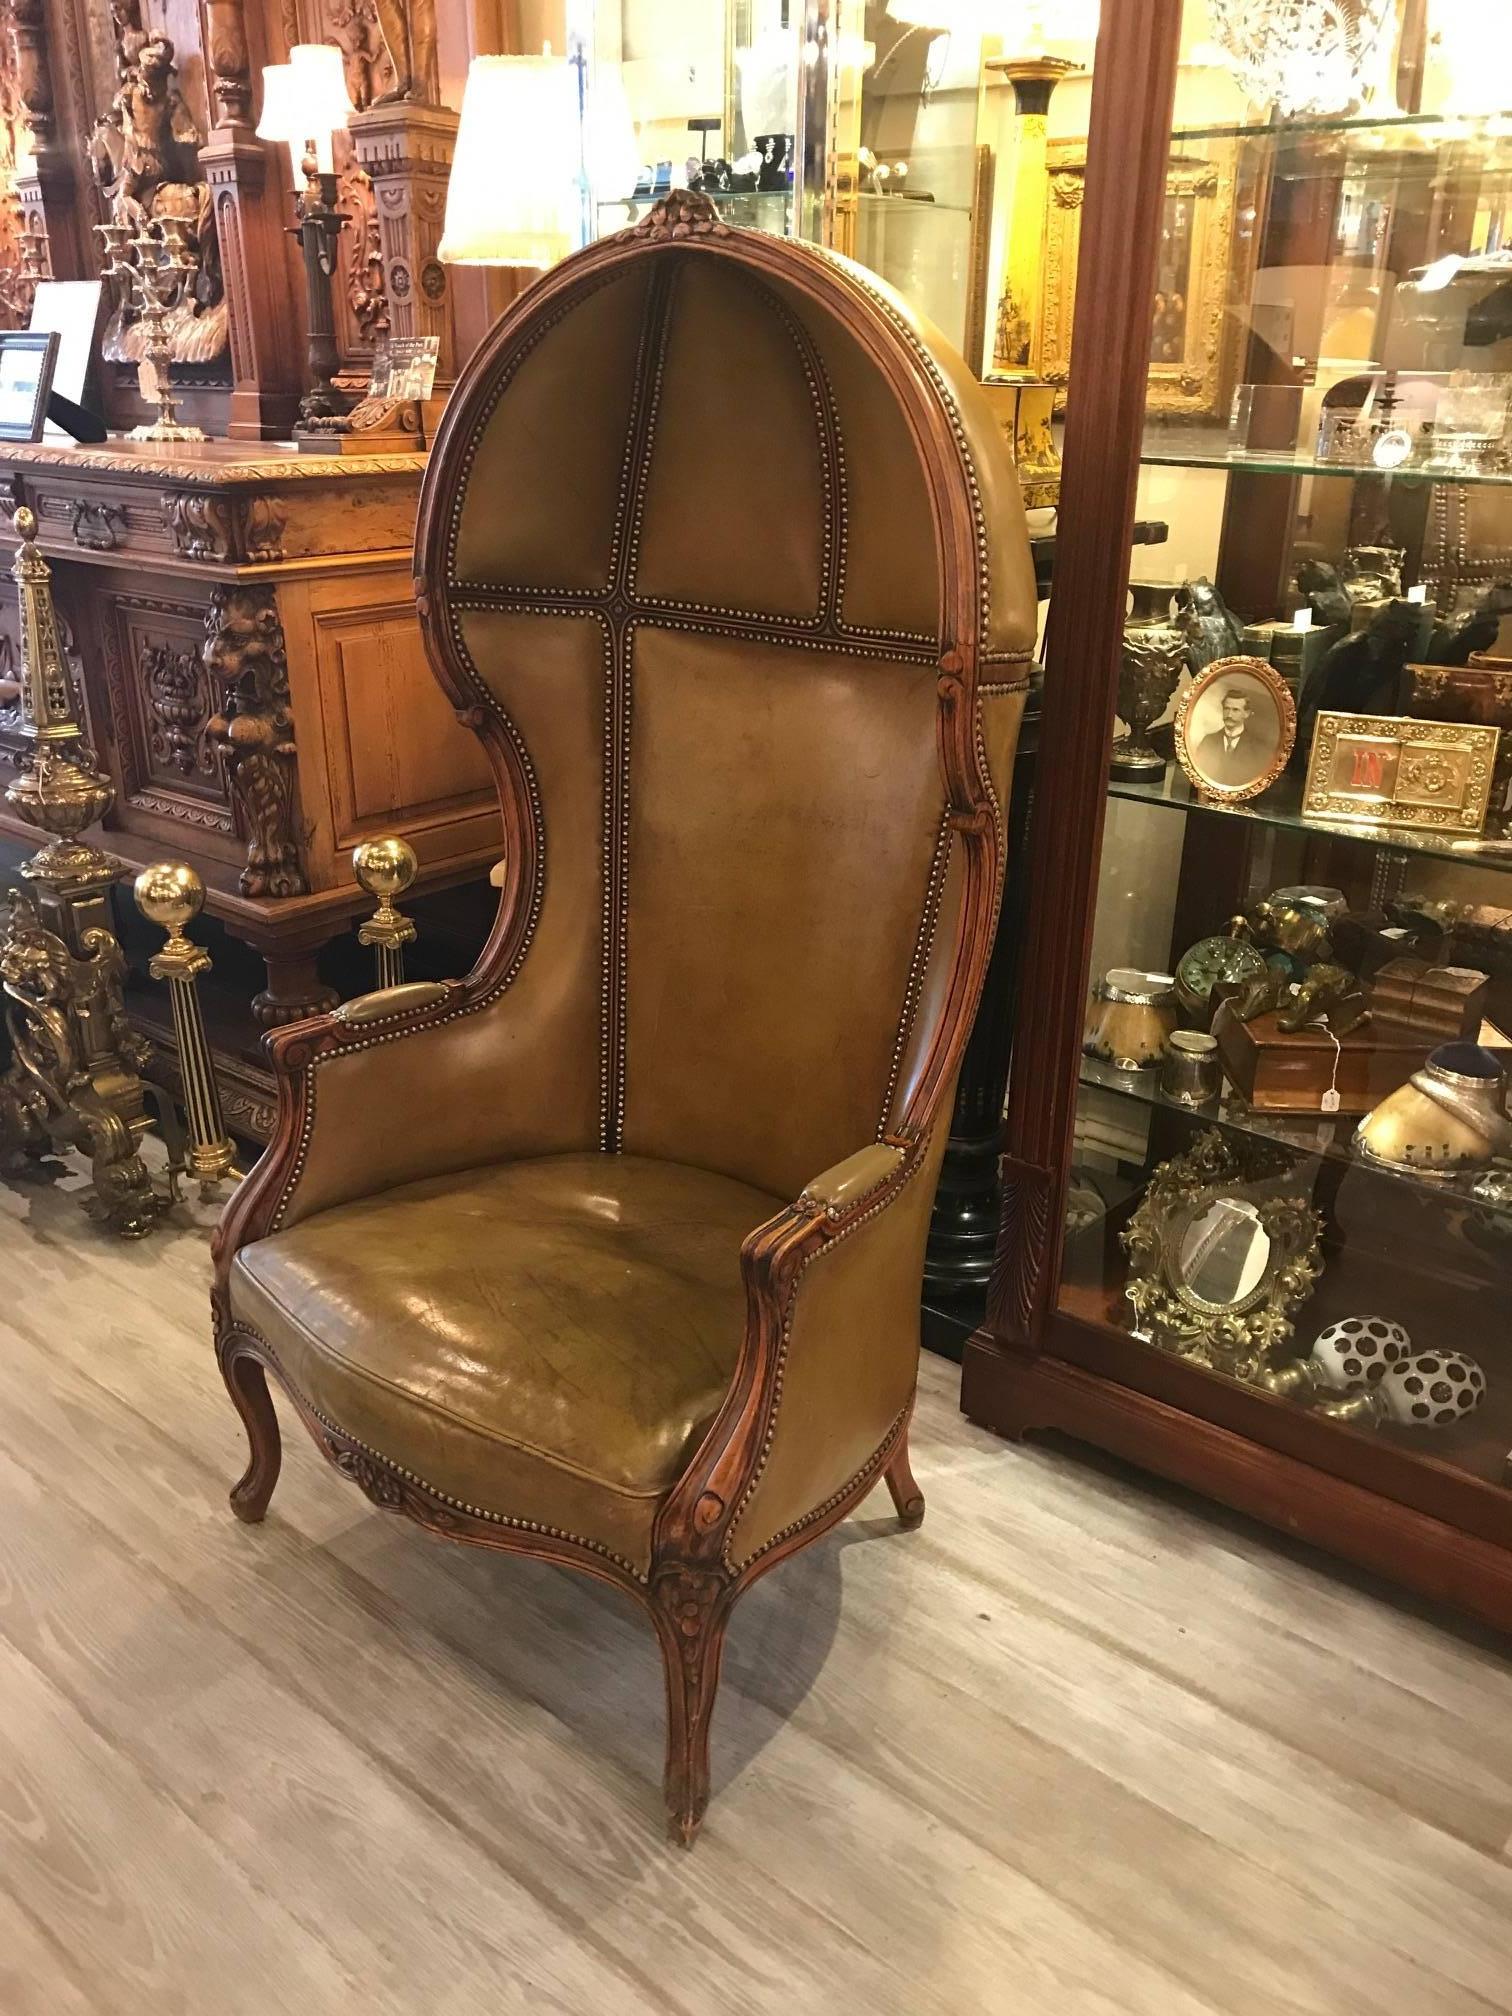 A Louis XV style leather upholstered hand carved beechwood porter chair.
The carved frame with cabriole legs upholstered in olive leather with brass nail head trim.
A porter's chair was a type of chair used in medieval England and later France.